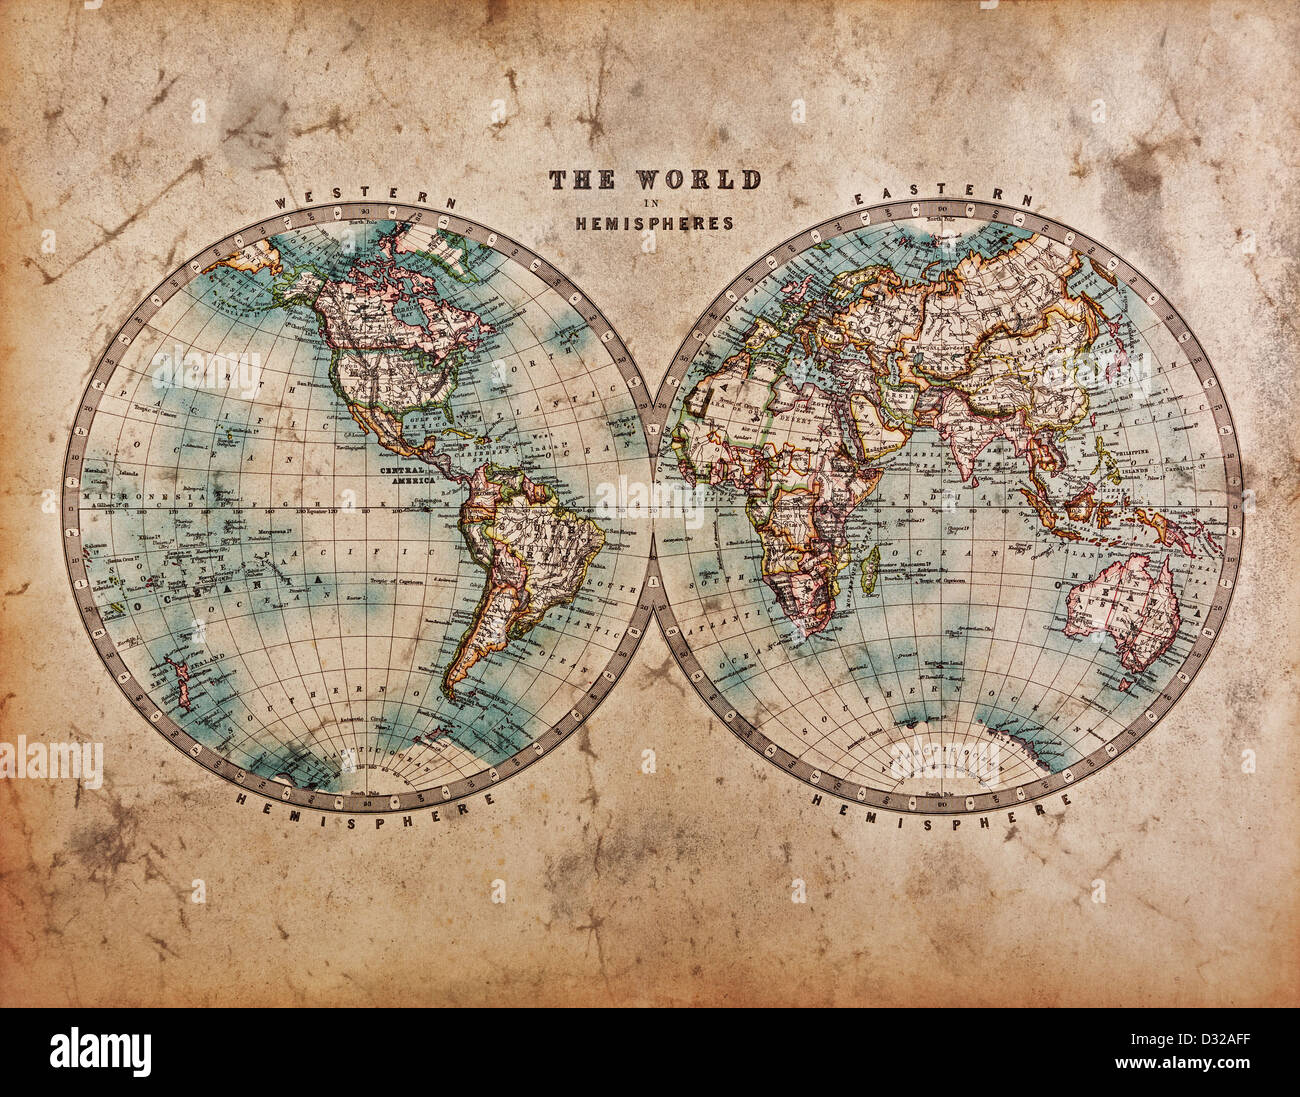 A genuine old stained World map dated from the mid 1800's showing Western and Eastern Hemispheres with hand colouring. Stock Photo